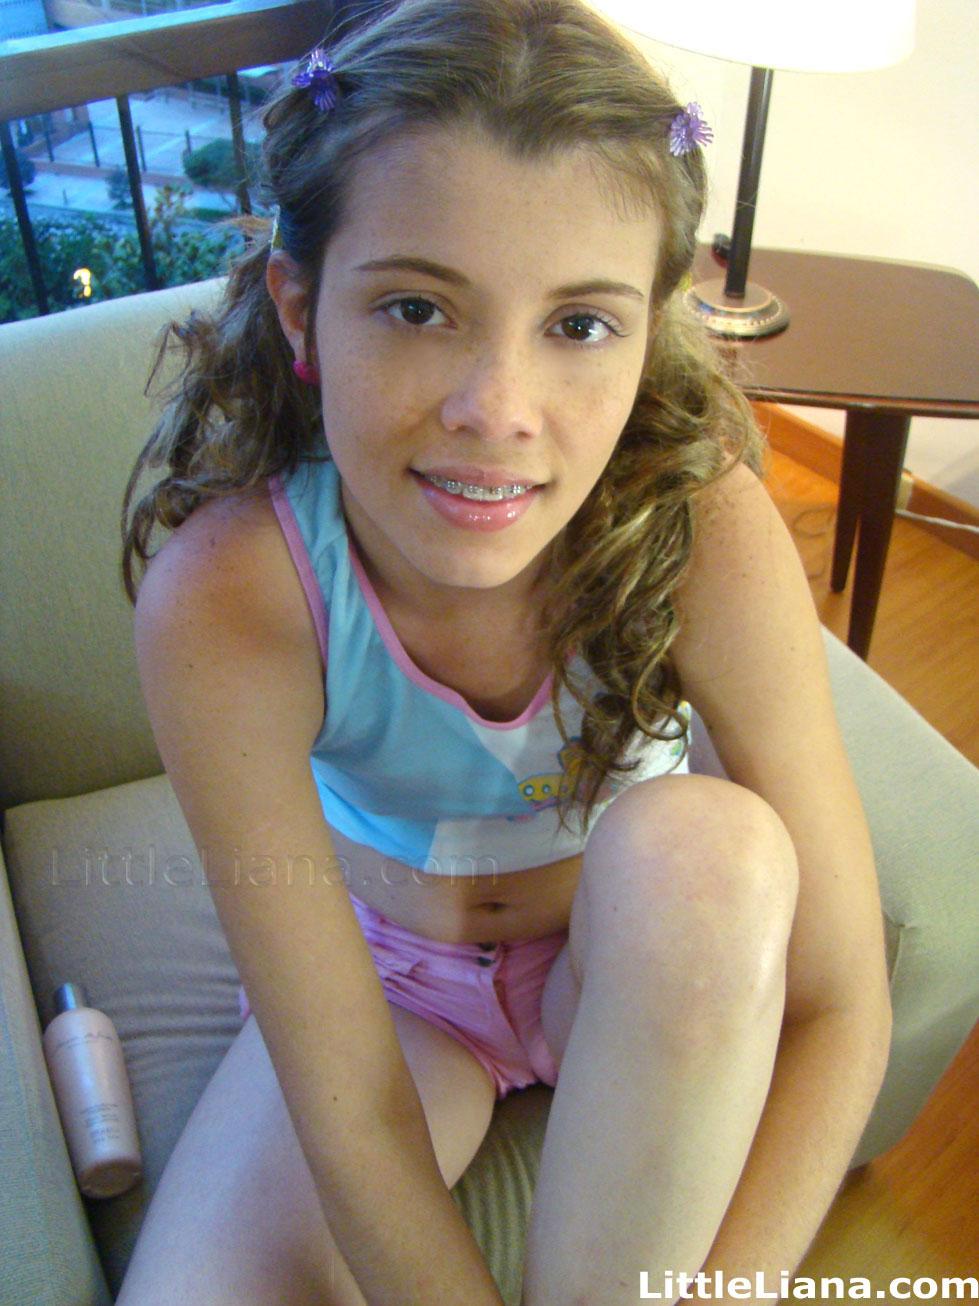 Pictures of teen girl Little Liana hanging out at home #59023237